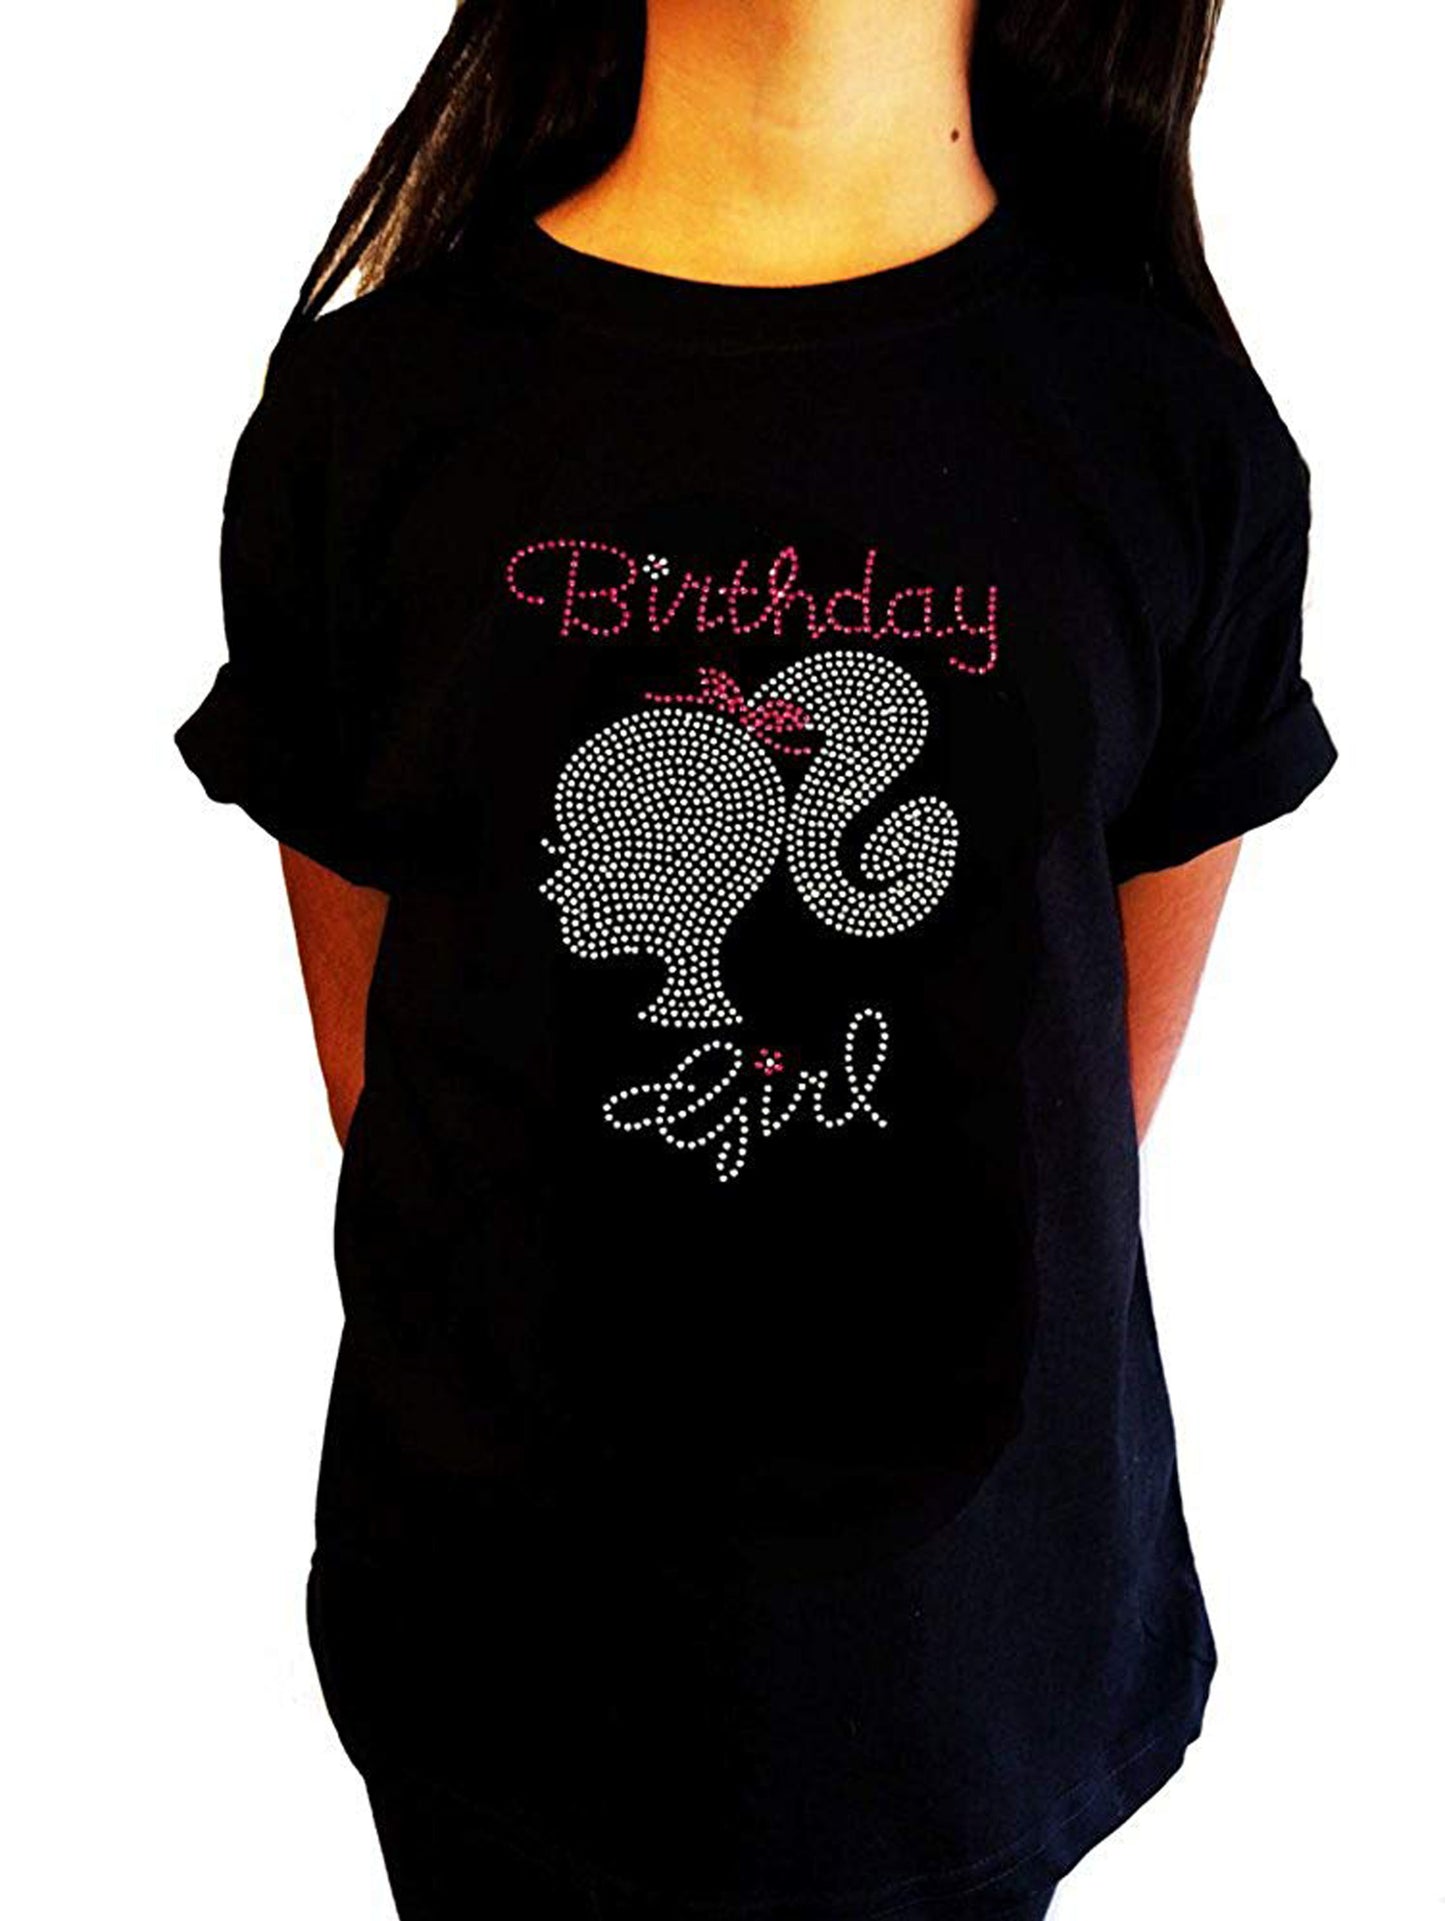 Birthday Girl with Silhouette